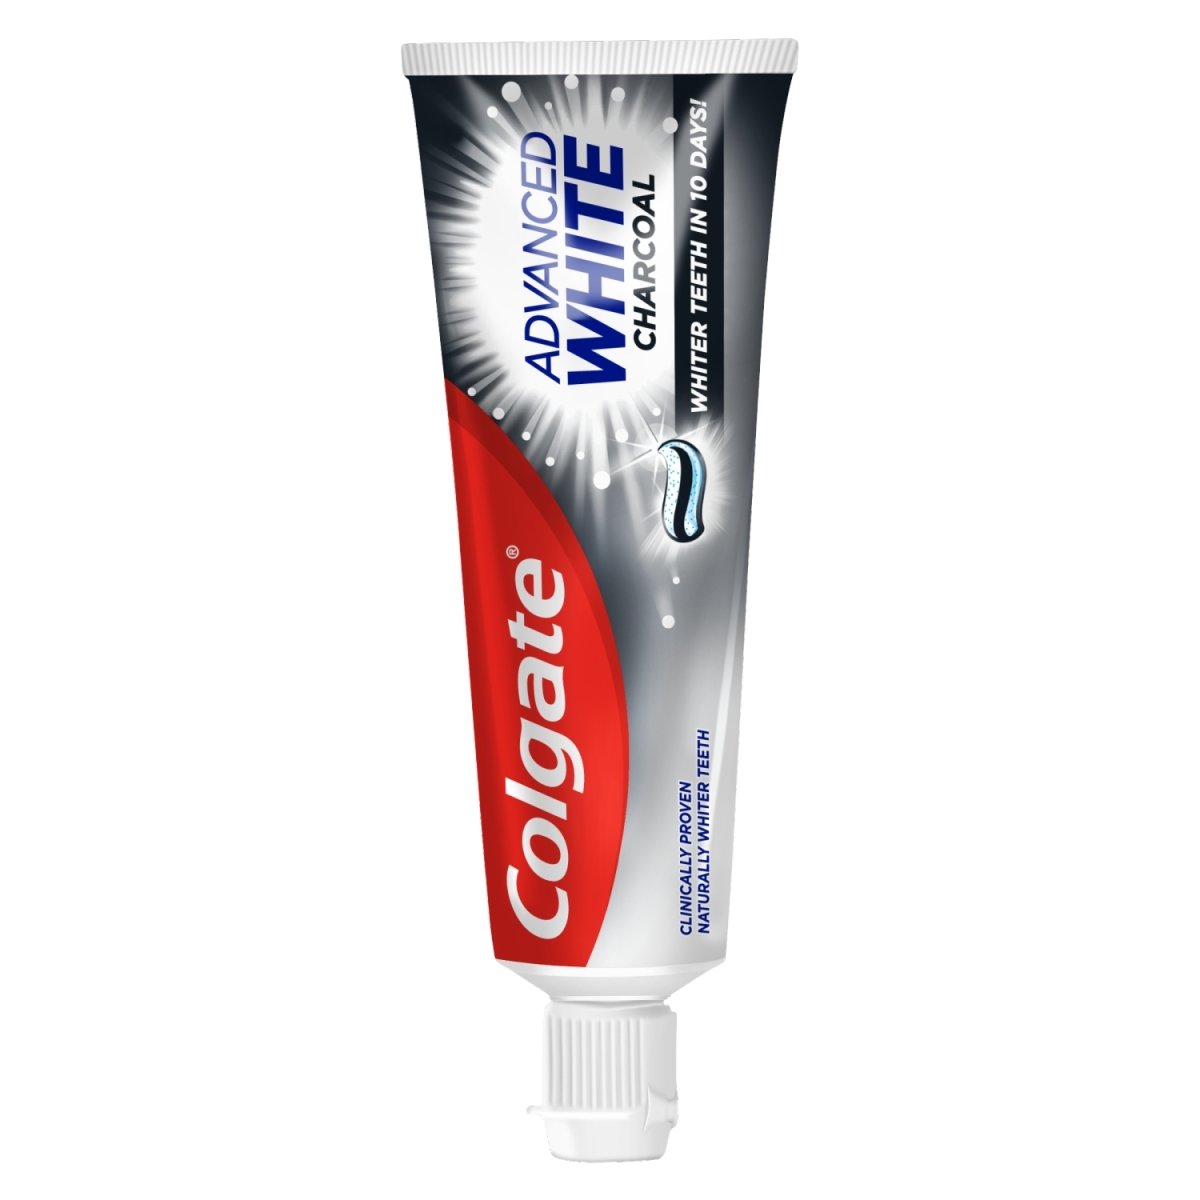 Colgate Toothpaste Advanced Whitening Charcoal - Intamarque 8718951253889